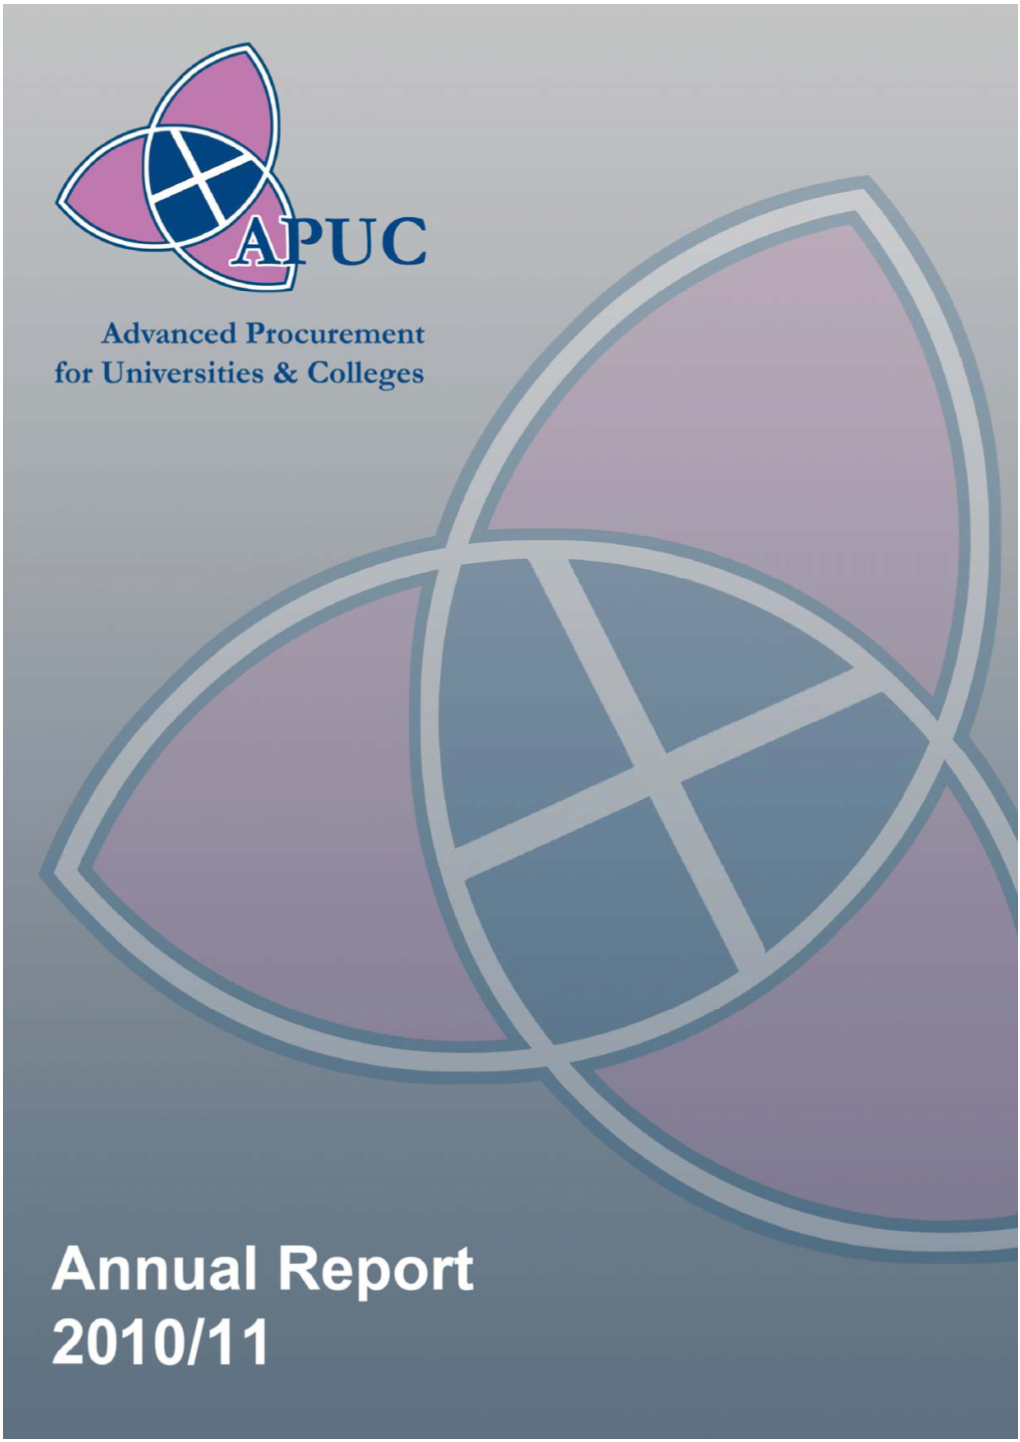 APUC Annual Report 2010-11 Approved.Pdf